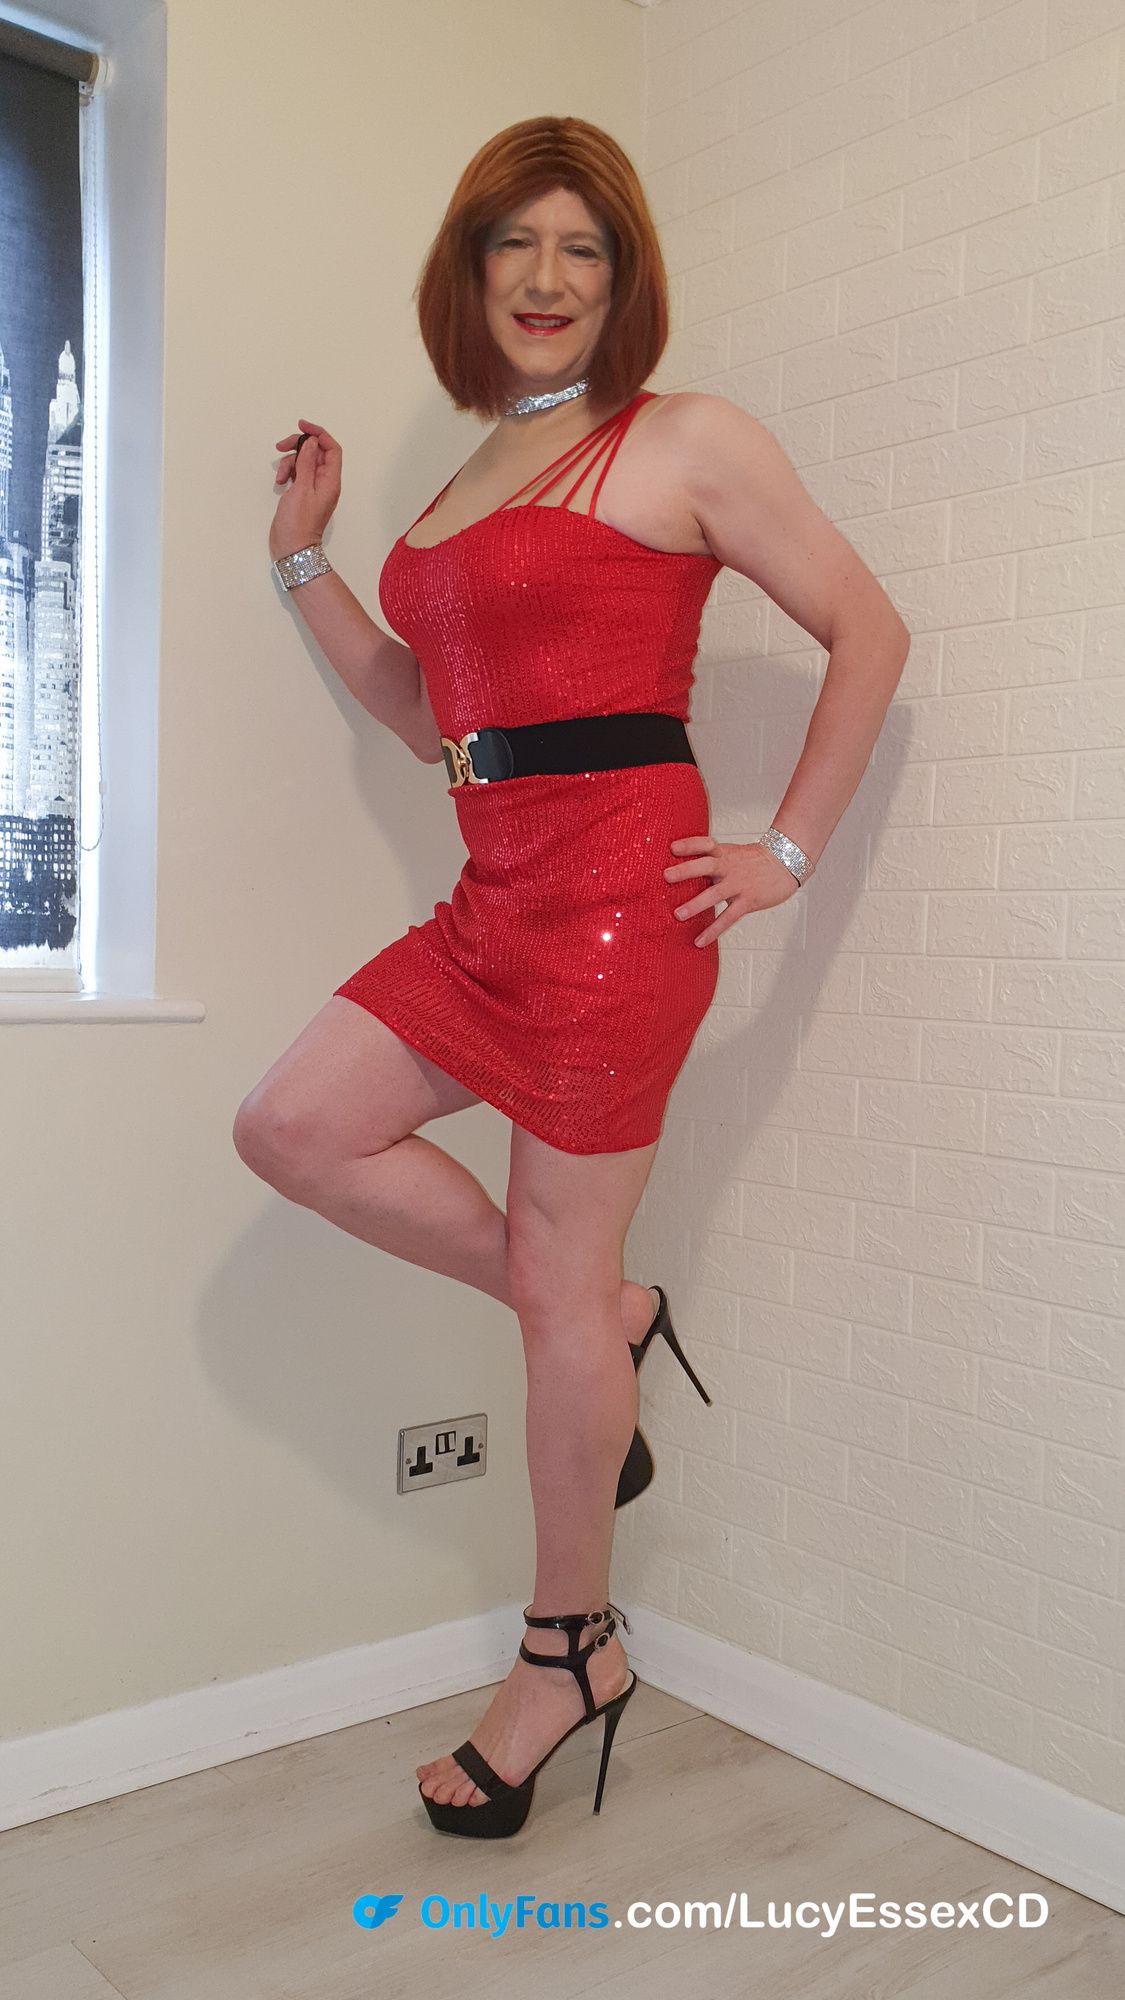 Sissy Lucy flashing my knickers and cock in red sequin dress